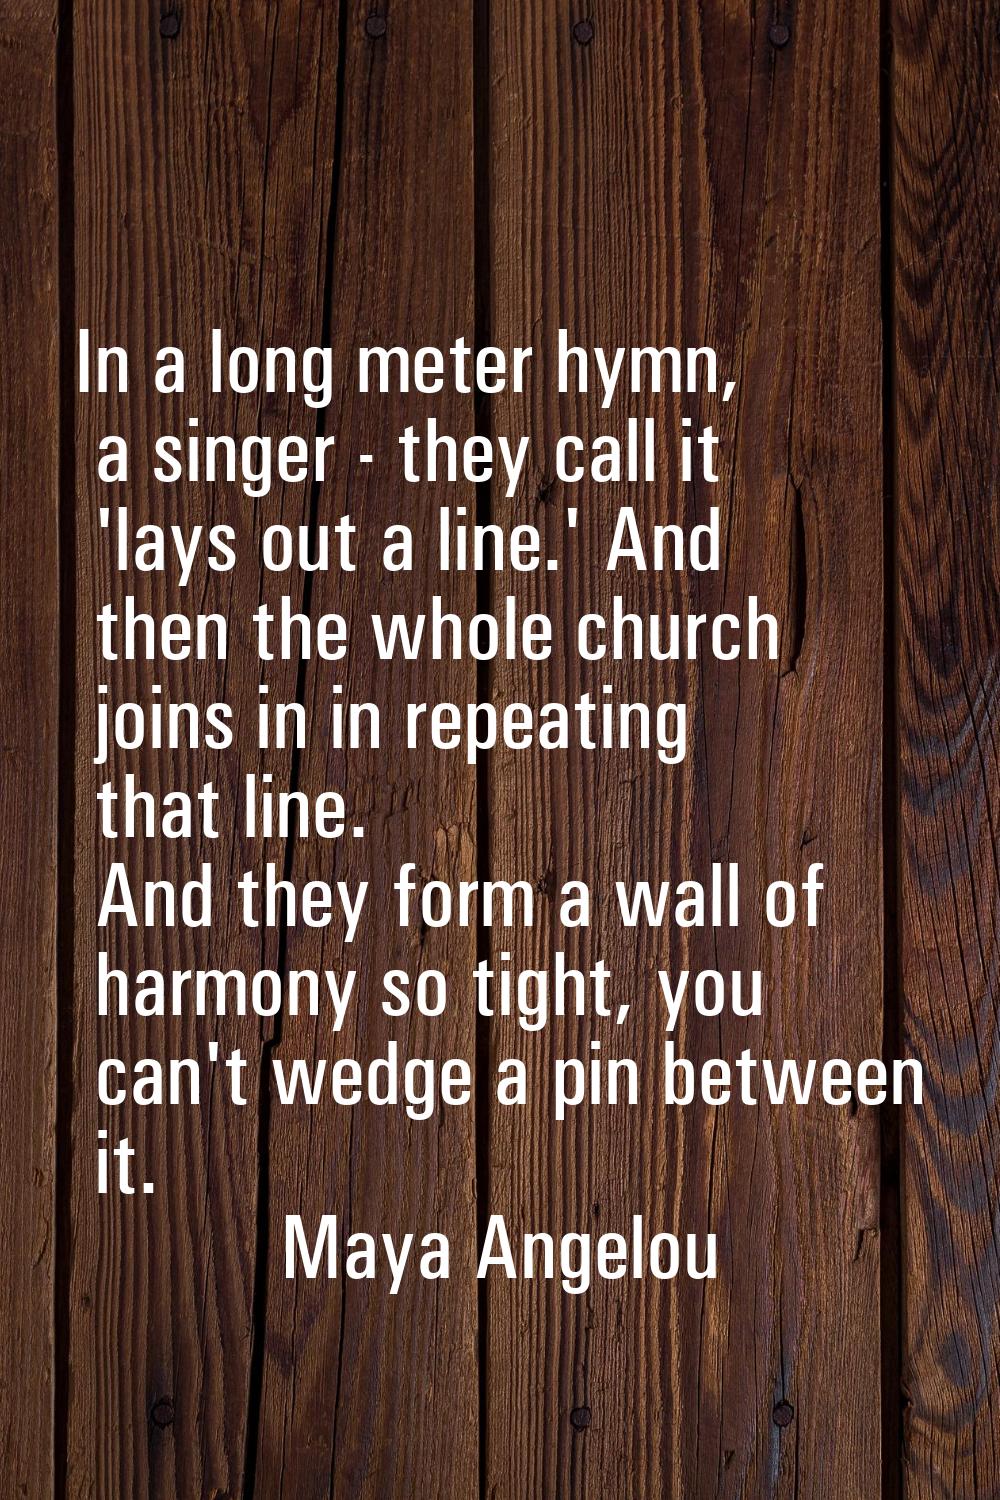 In a long meter hymn, a singer - they call it 'lays out a line.' And then the whole church joins in